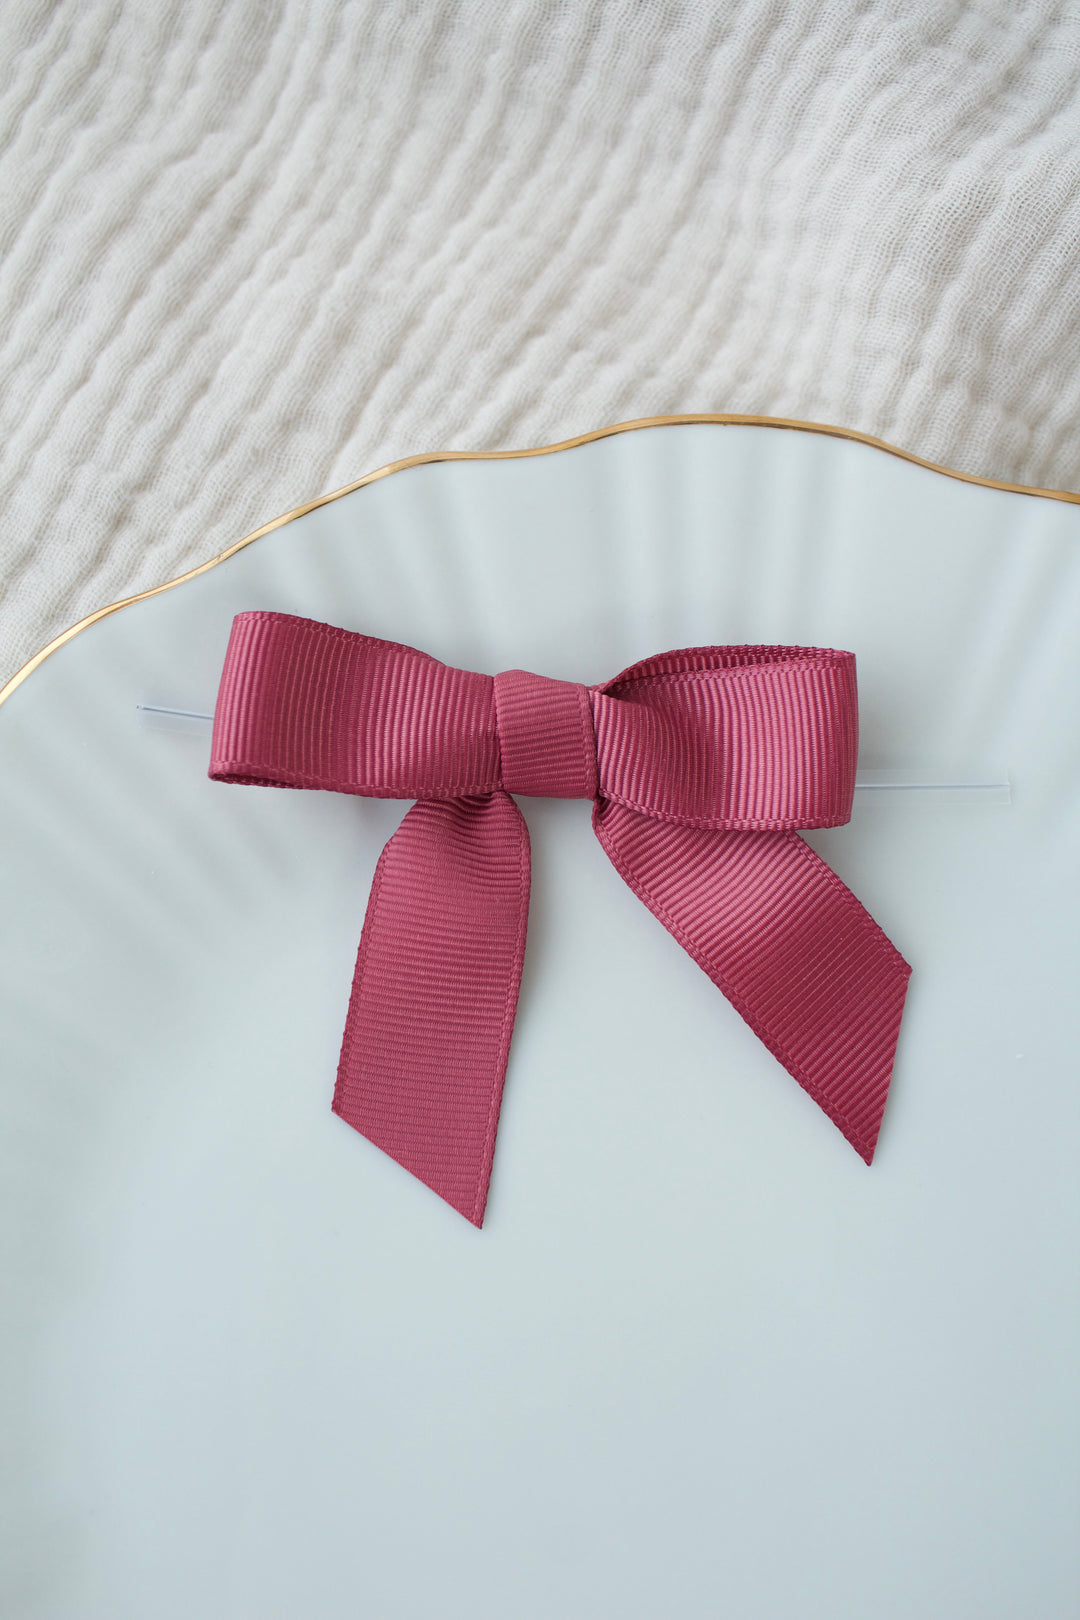 Cherry - Grosgrains pre-tied bows (20pcs) with clear twist tie